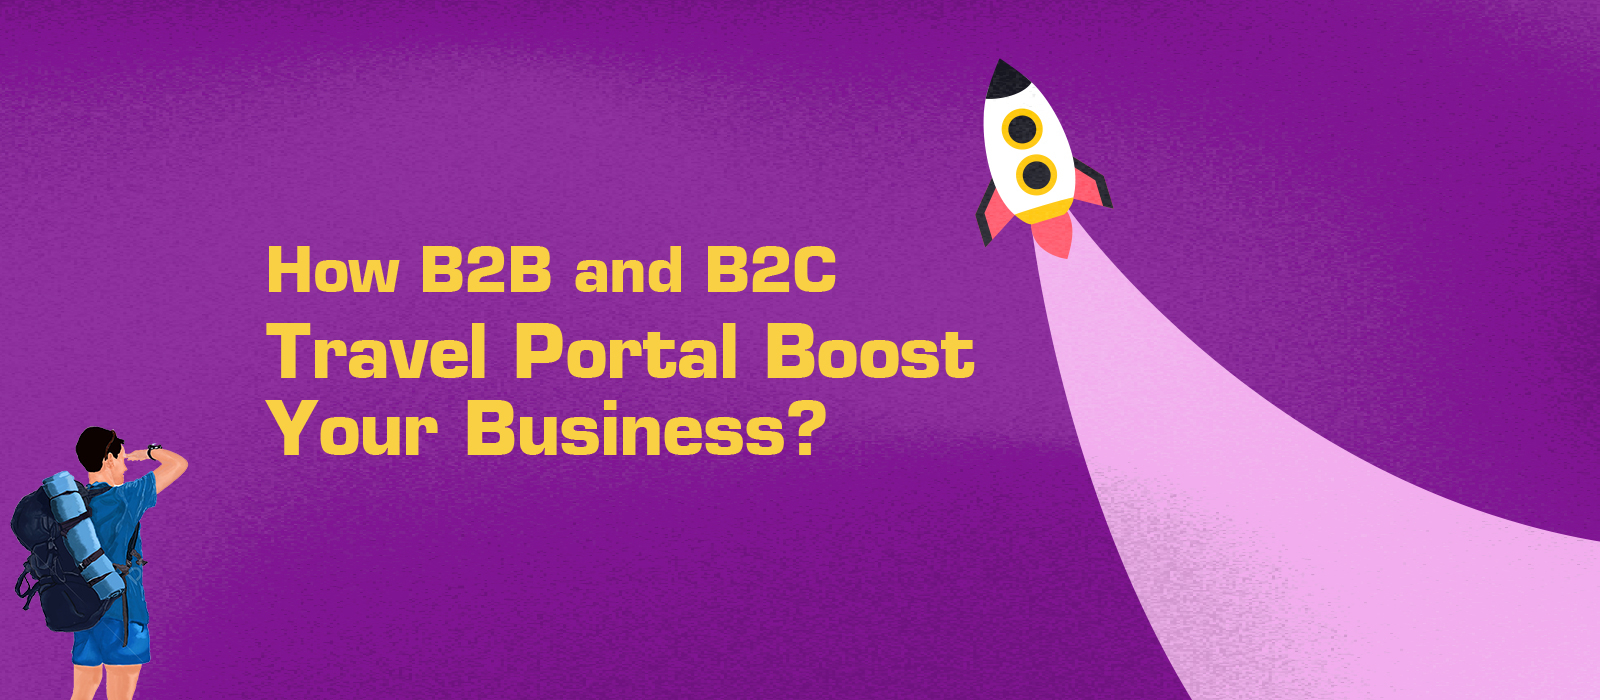 How B2B and B2C Travel Portal Boost Your Business?